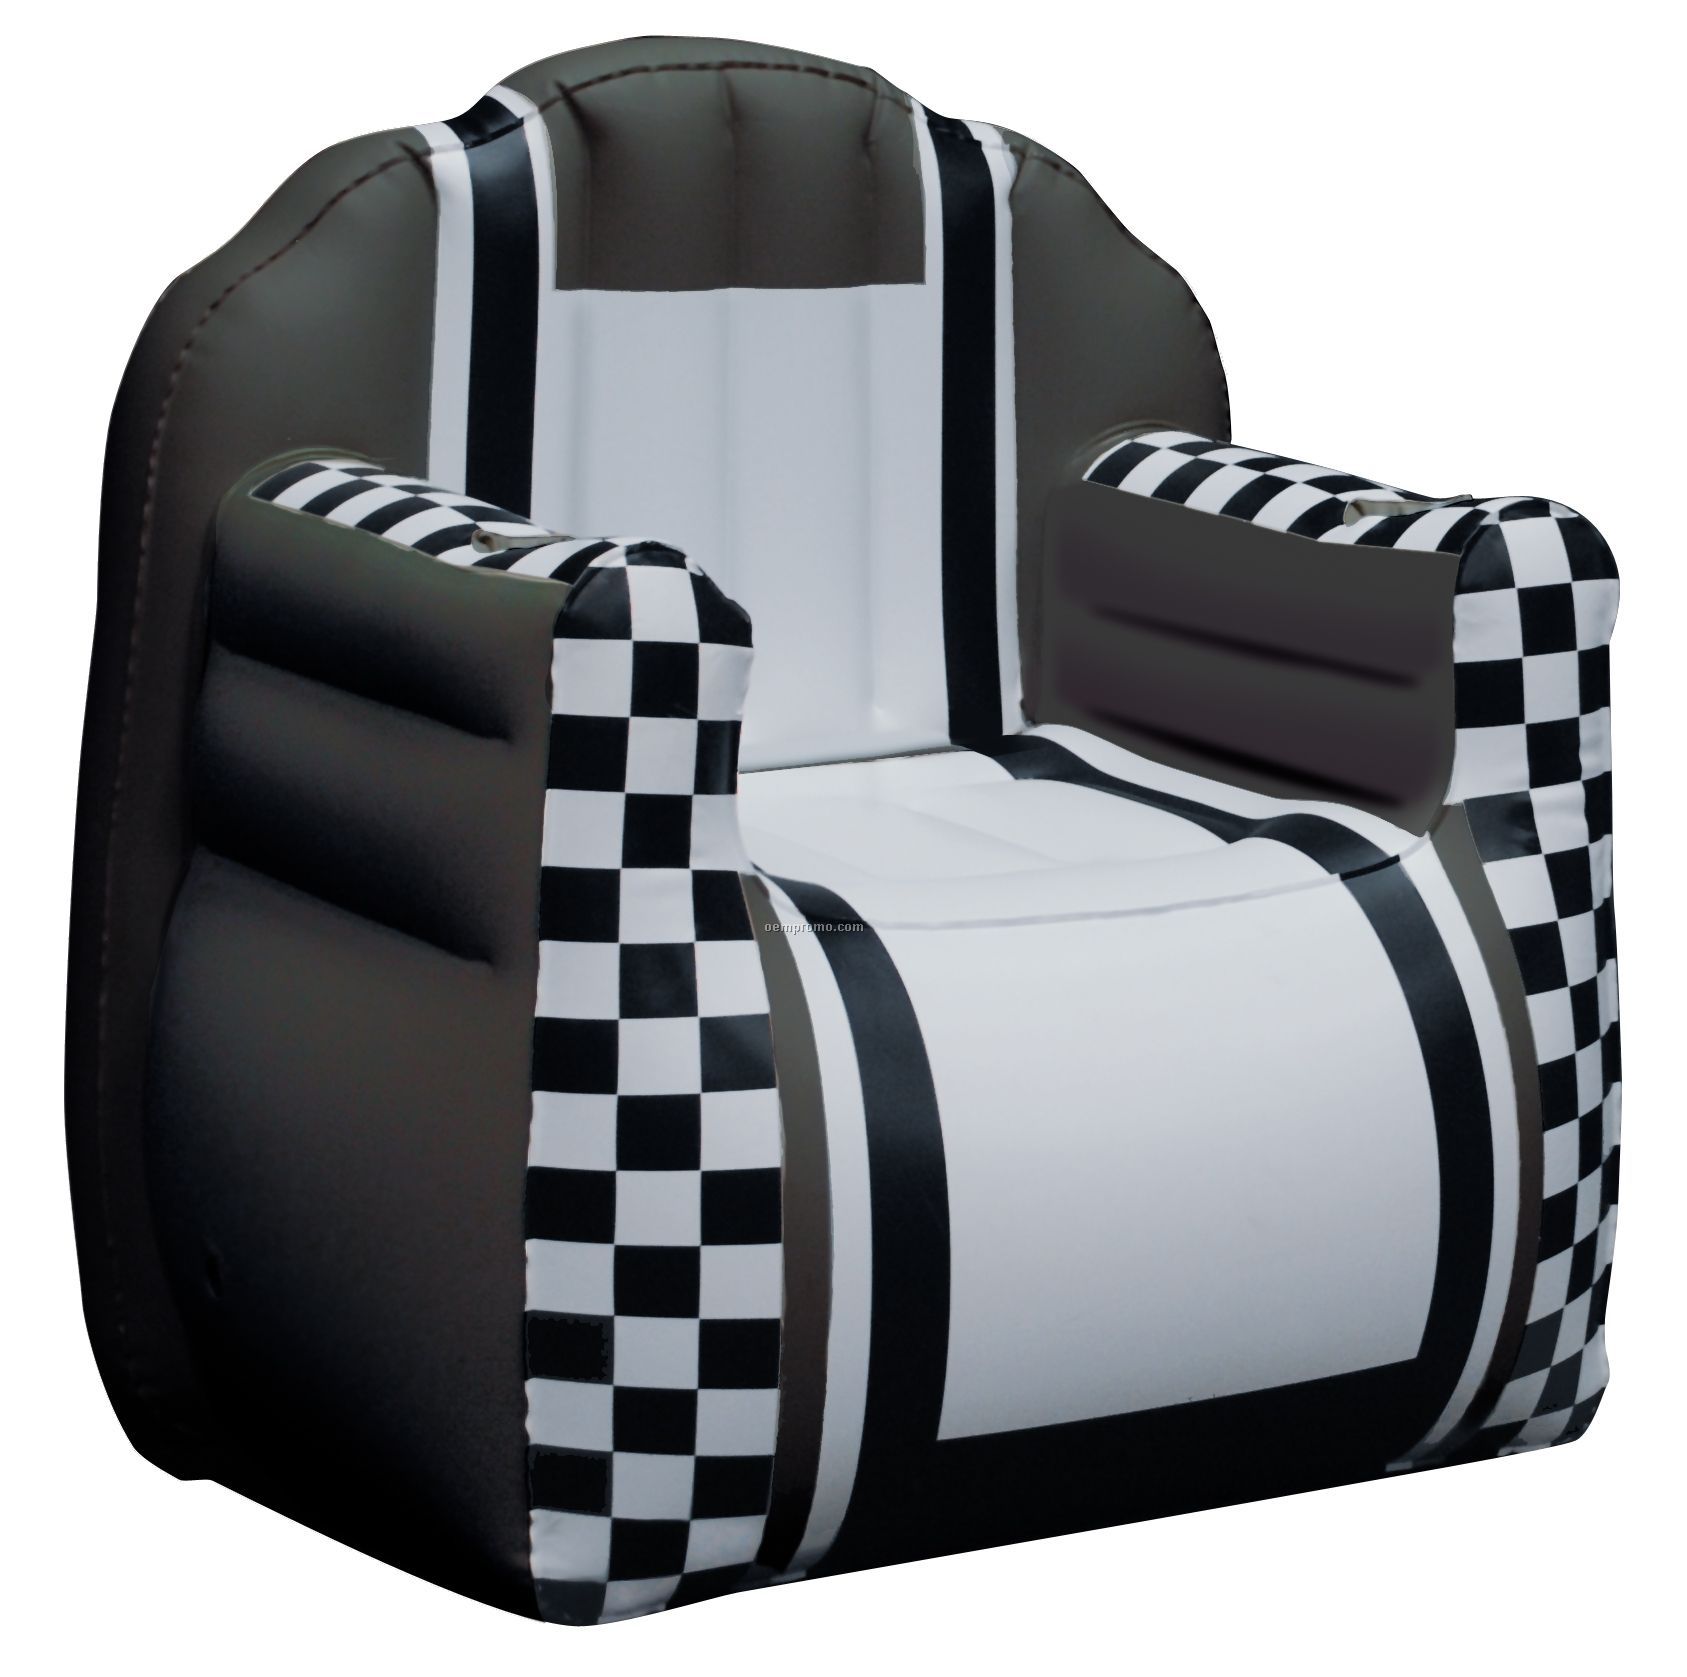 Inflate-a-seat "Chair": Black/White/Black With Checkered Arms